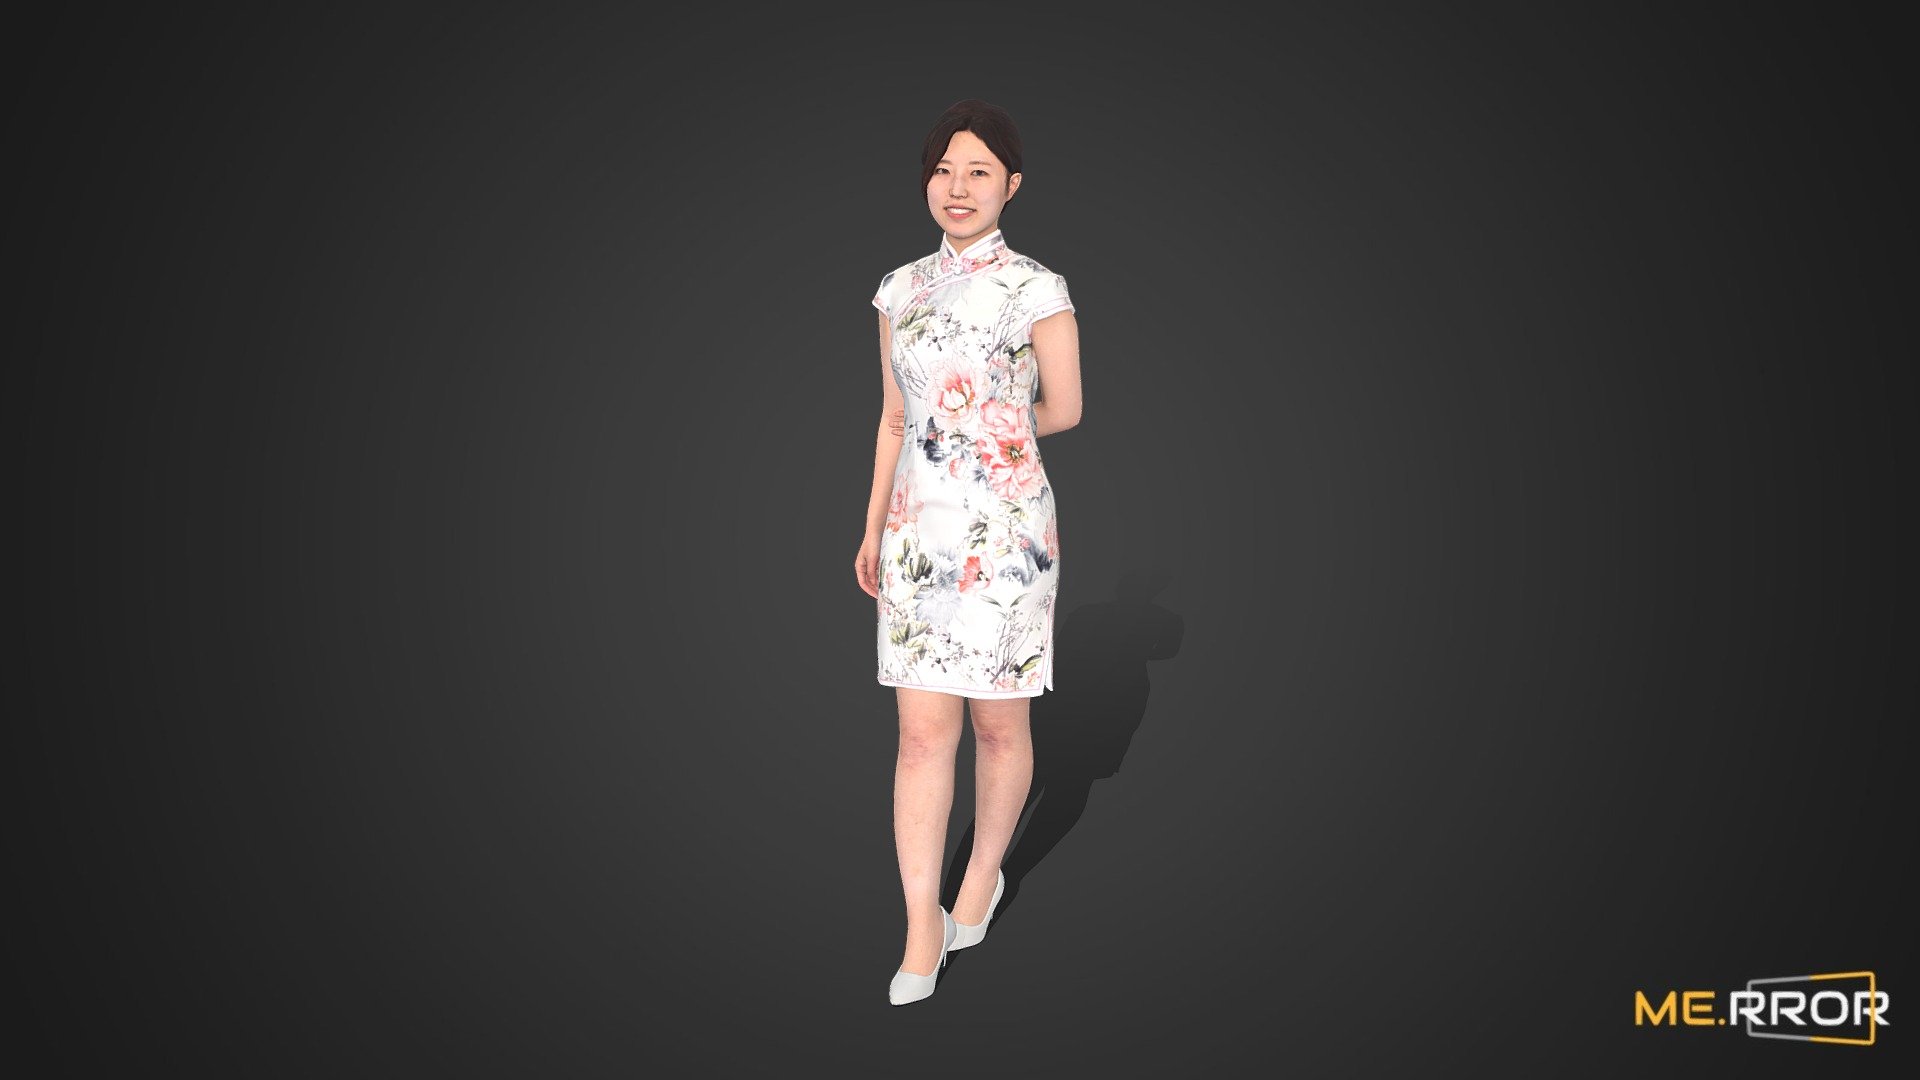 ME.RROR


From 3D models of Asian individuals to a fresh selection of free assets available each month - explore a richer diversity of photorealistic 3D assets at the ME.RROR asset store!

https://me-rror.com/store




[Model Info]




Model Formats : FBX, MAX


Texture Maps (8K) : Diffuse, Normal




Find Scanned - 2M poly version here: https://sketchfab.com/3d-models/eb63943ac41d4e90b7eb46b1499ed439



If you encounter any problems using this model, please feel free to contact us. We'd be glad to help you.



[About ME.RROR]

Step into the future with ME.RROR, South Korea's leading 3D specialist. Bespoke creations are not just possible; they are our specialty.

Service areas:




3D scanning

3D modeling

Virtual human creation

Inquiries: https://merror.channel.io/lounge - [Game-Ready] Asian Woman Scan_Posed 18 - Buy Royalty Free 3D model by ME.RROR Studio (@merror) 3d model